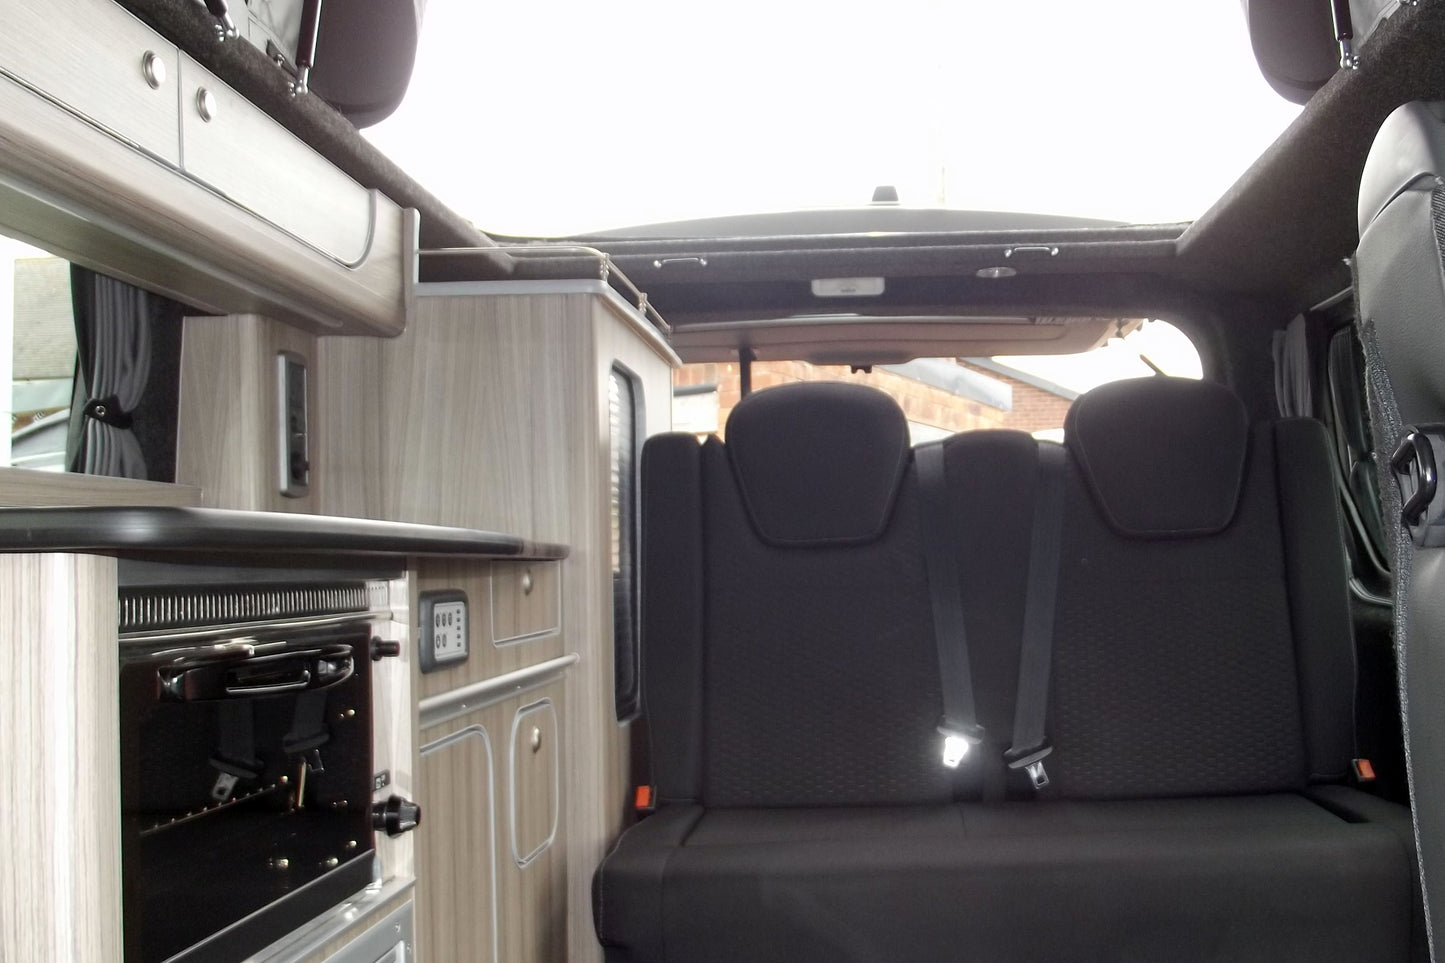 The Bliss Duo Double Rock 'n' Roll bed for Nissan Nv200 2009+ Renault Trafic & Nissan NV300 2014+